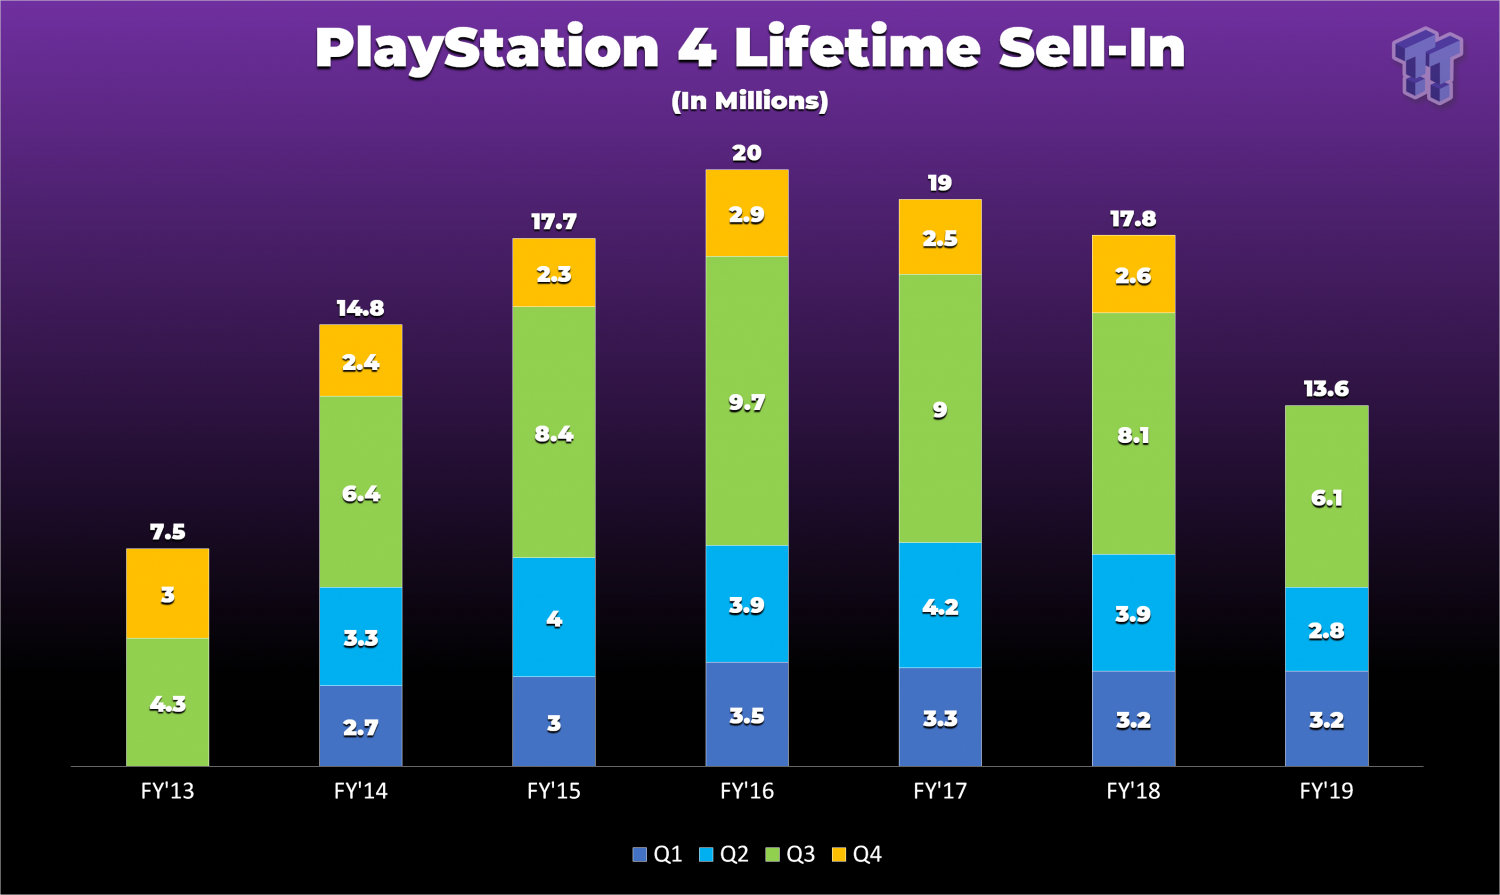 Thousands UK gamers more interested in PlayStation 5 Xbox